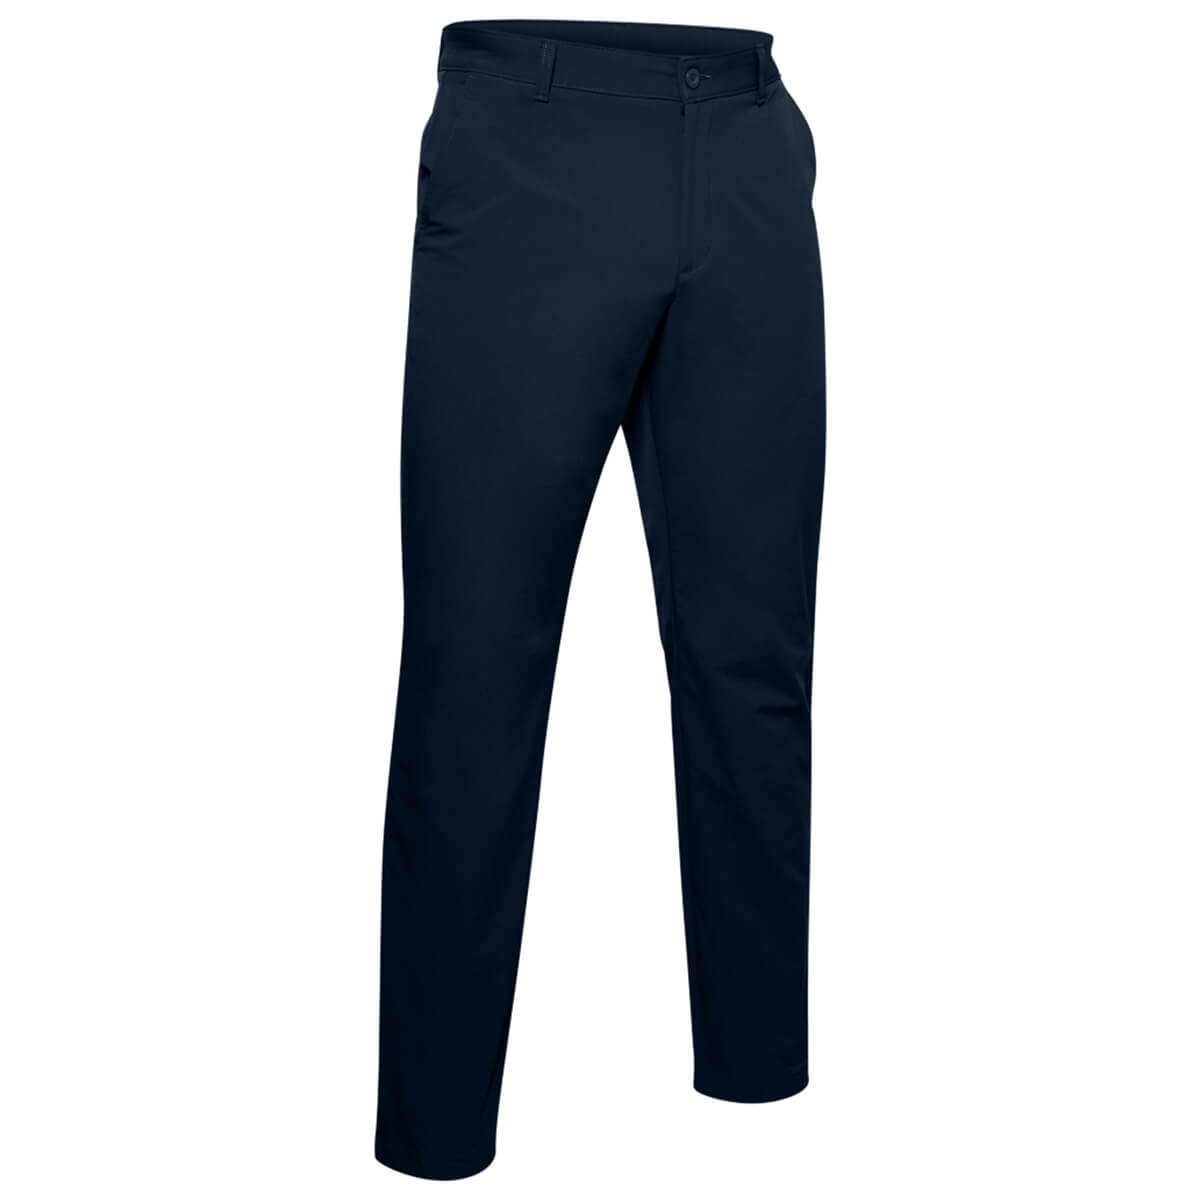 Greg Norman Women's Pull On Stretch Golf Pants – Empowered by Golf